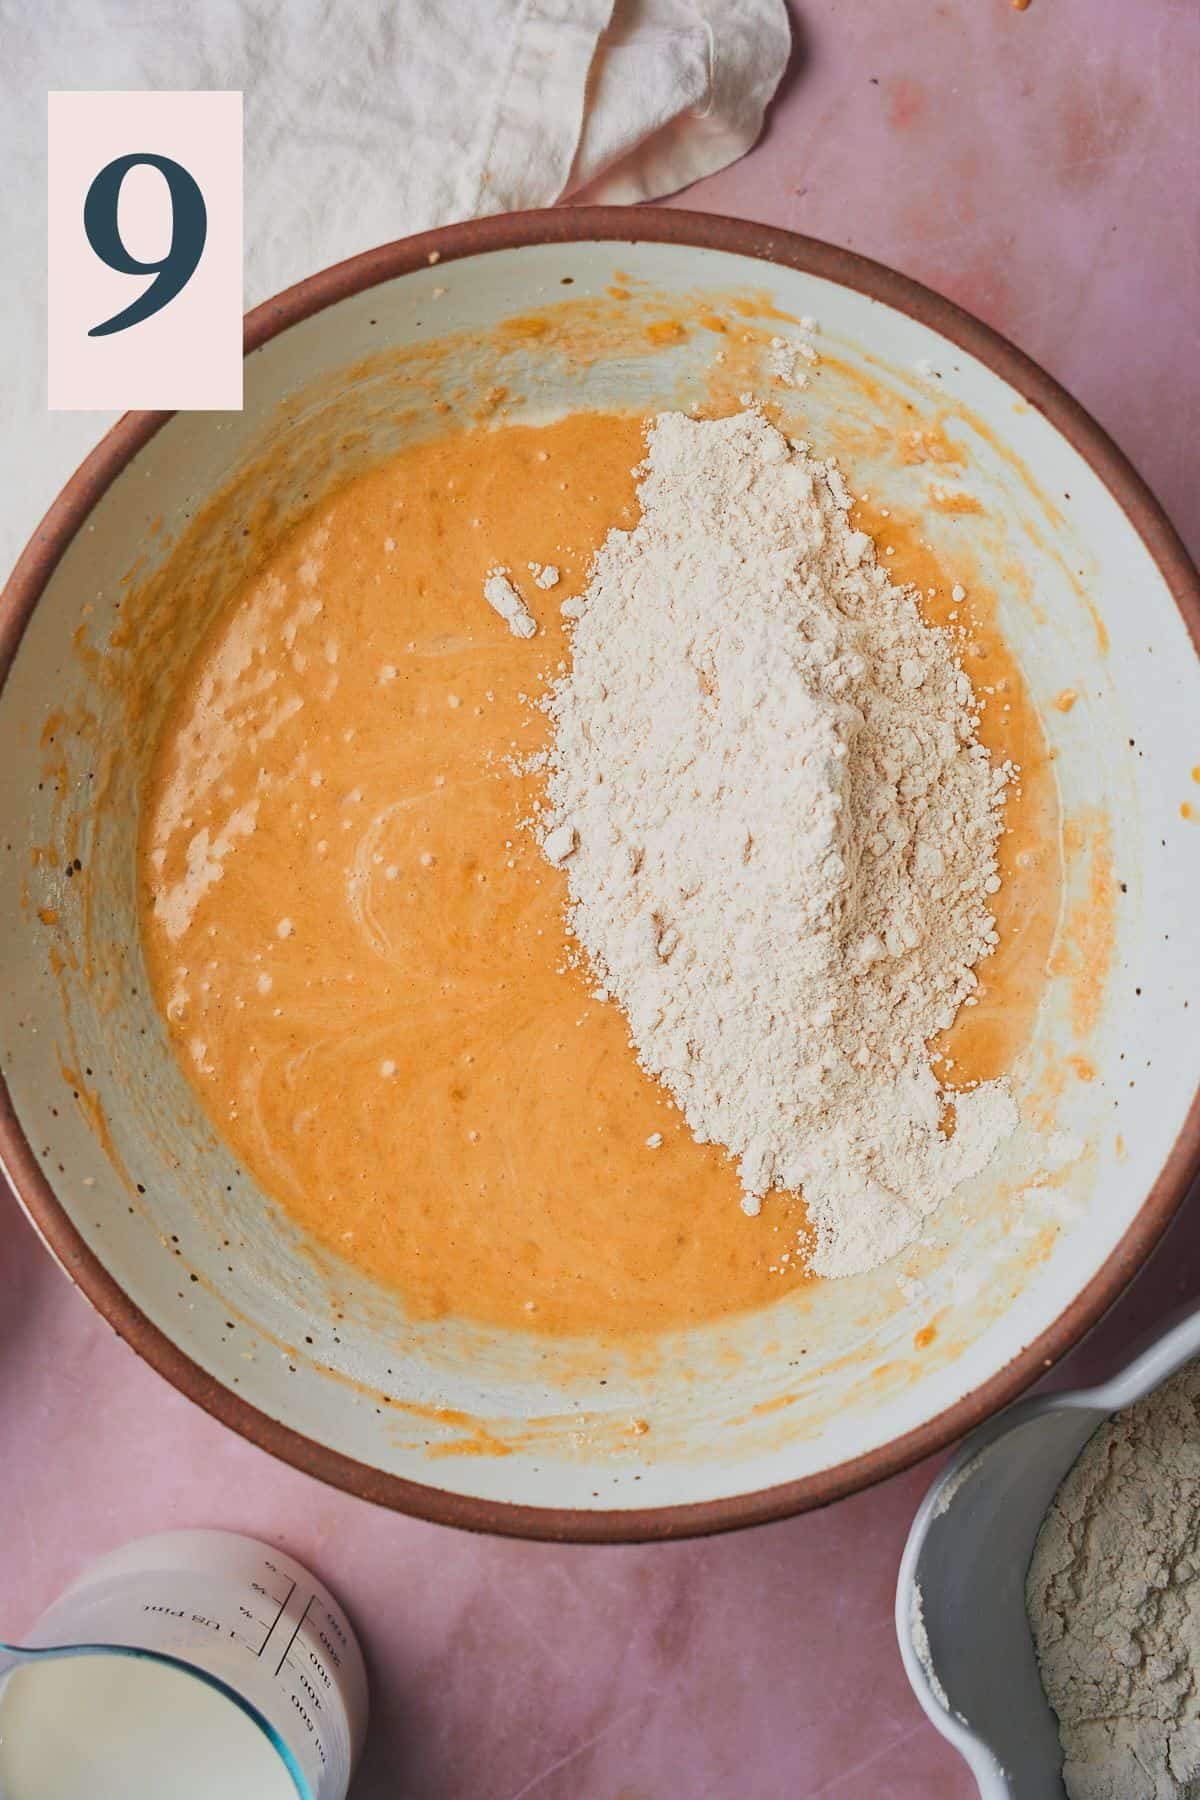 dry ingredients added to the banana cake batter.